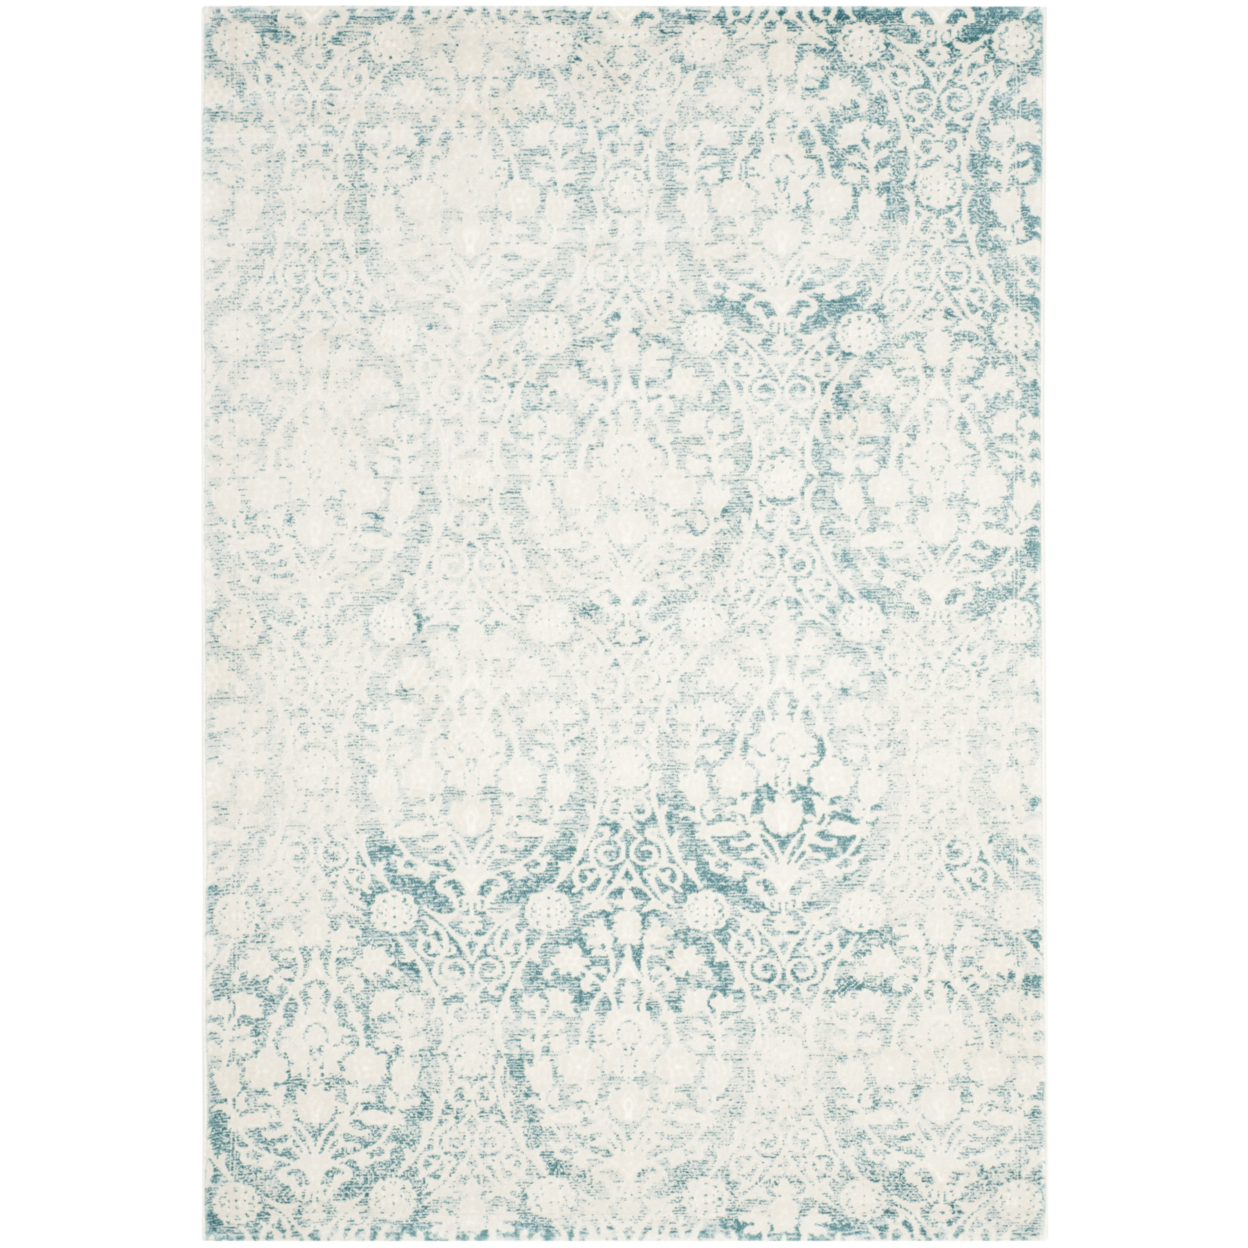 SAFAVIEH Passion Collection PAS403B Turquoise / Ivory Rug - 4' X 5' 7